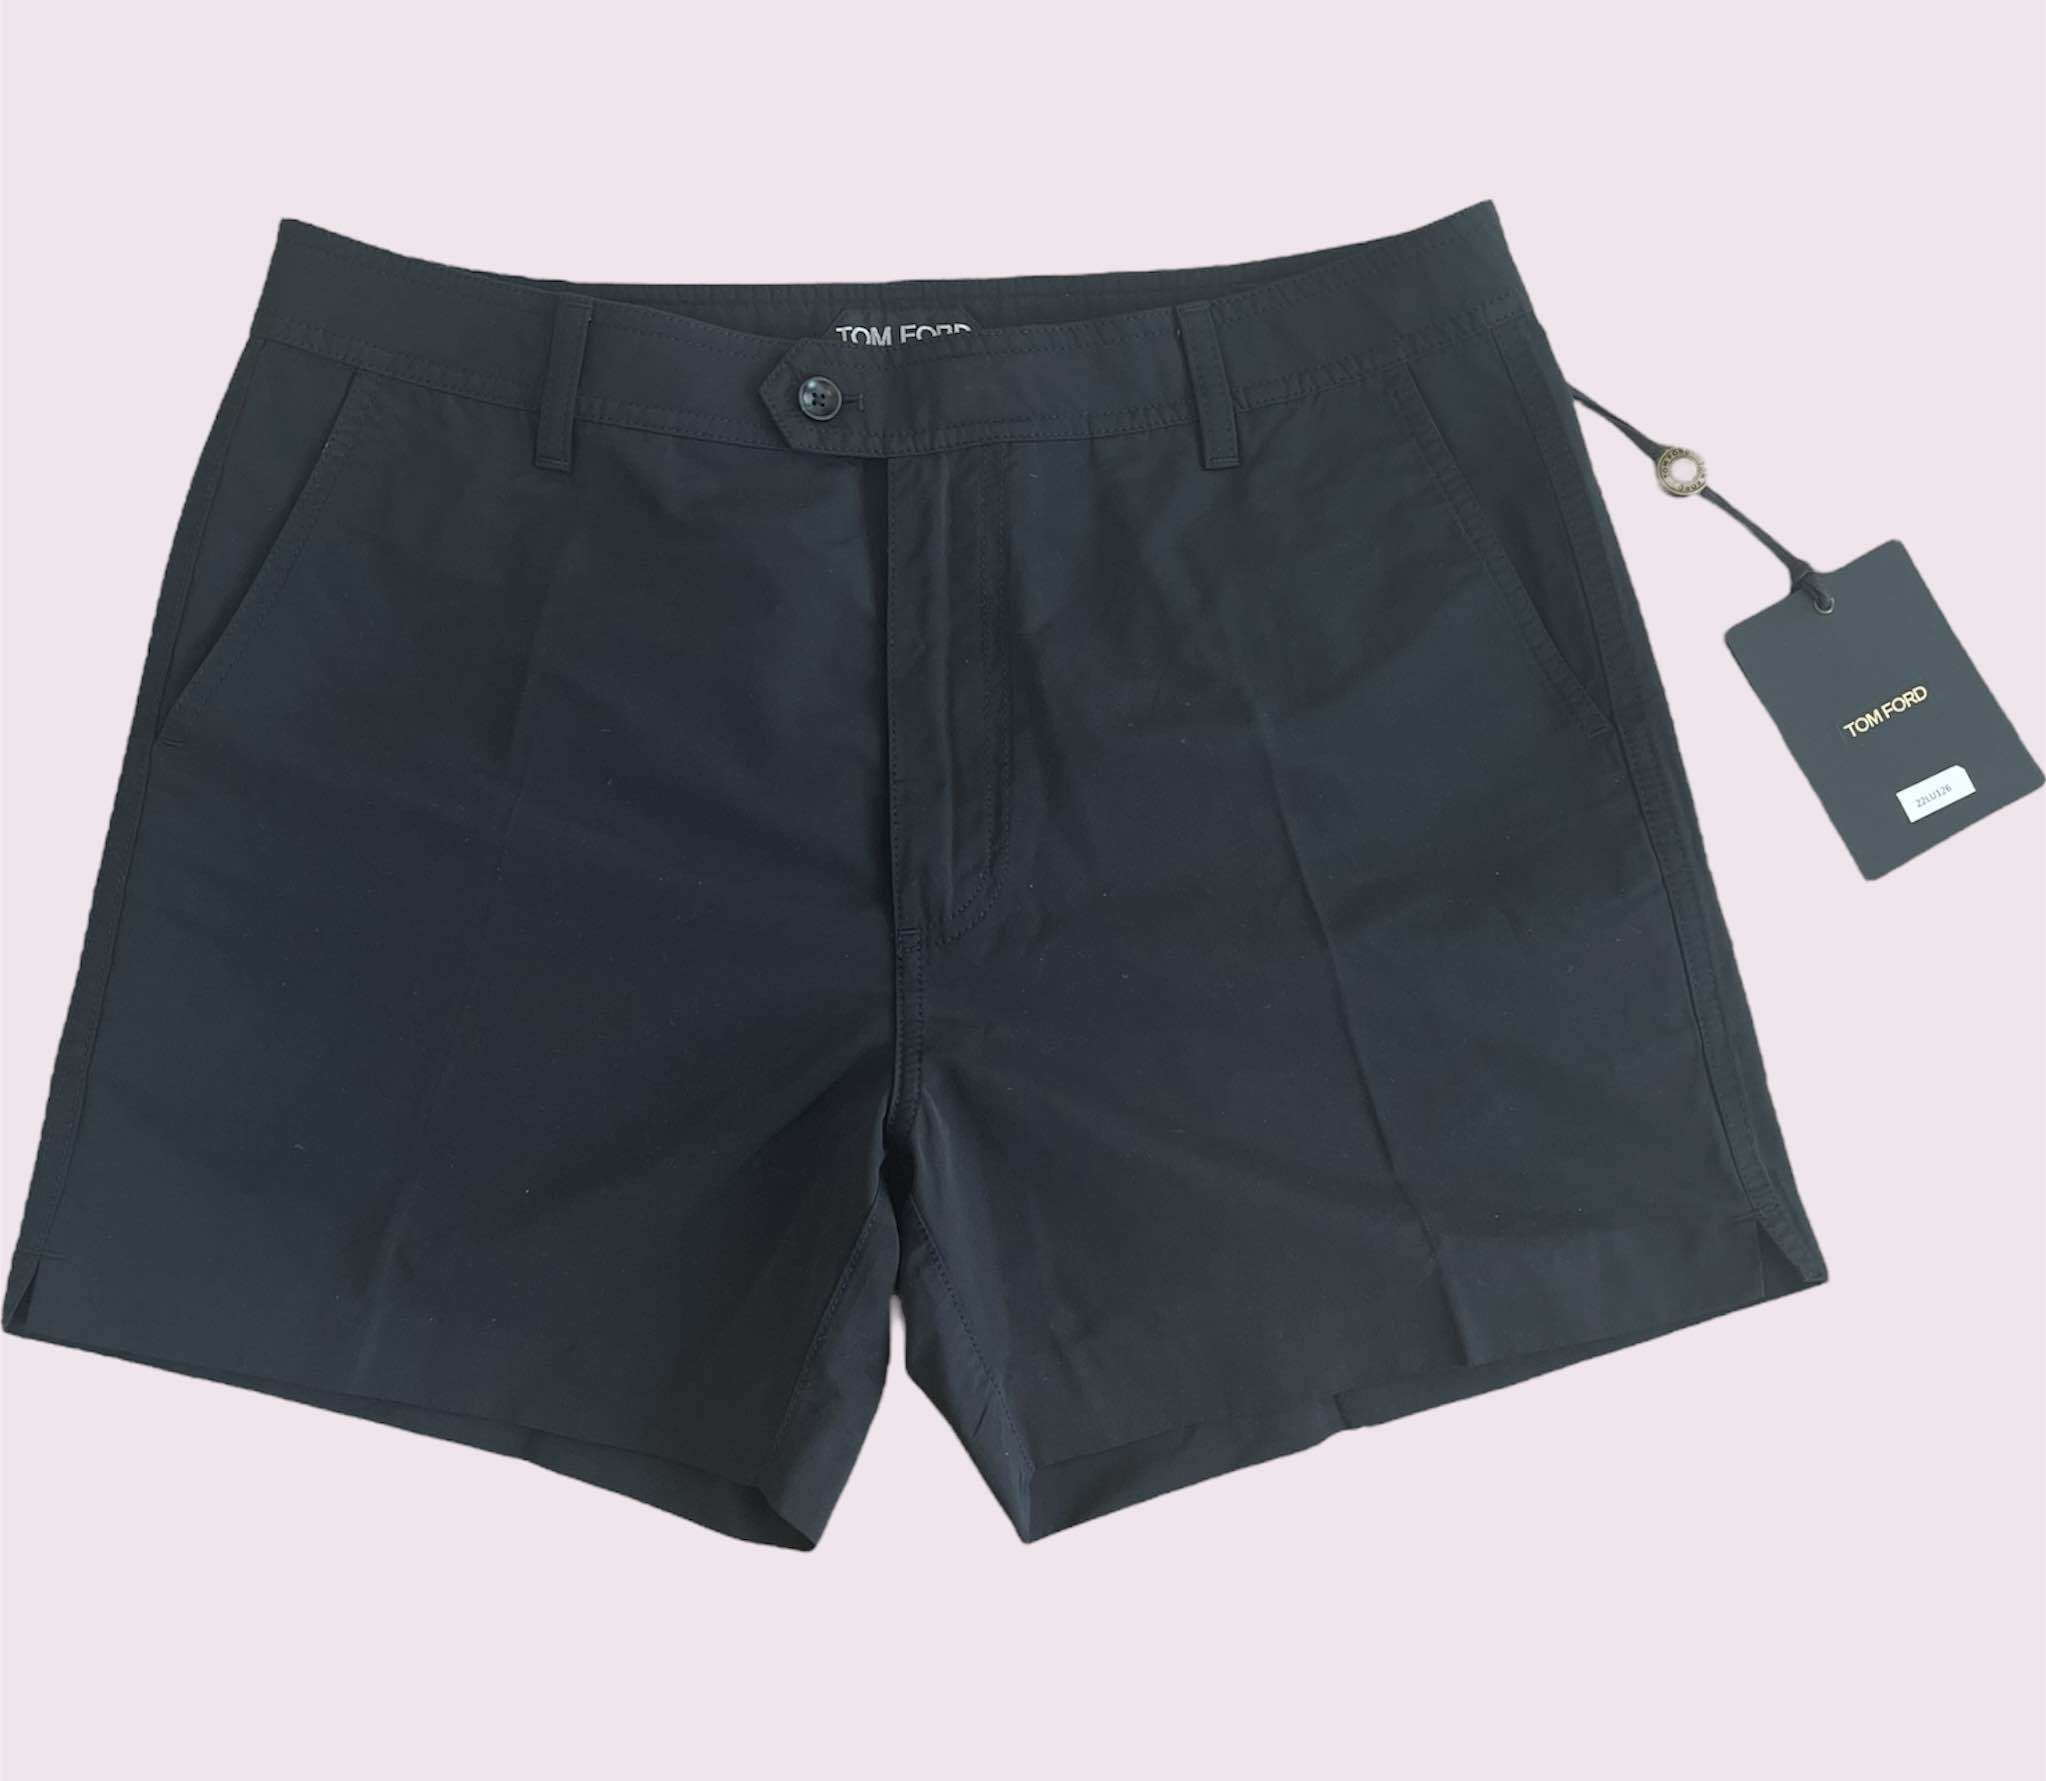 Tom Ford Shorts (New With Tags) - 1